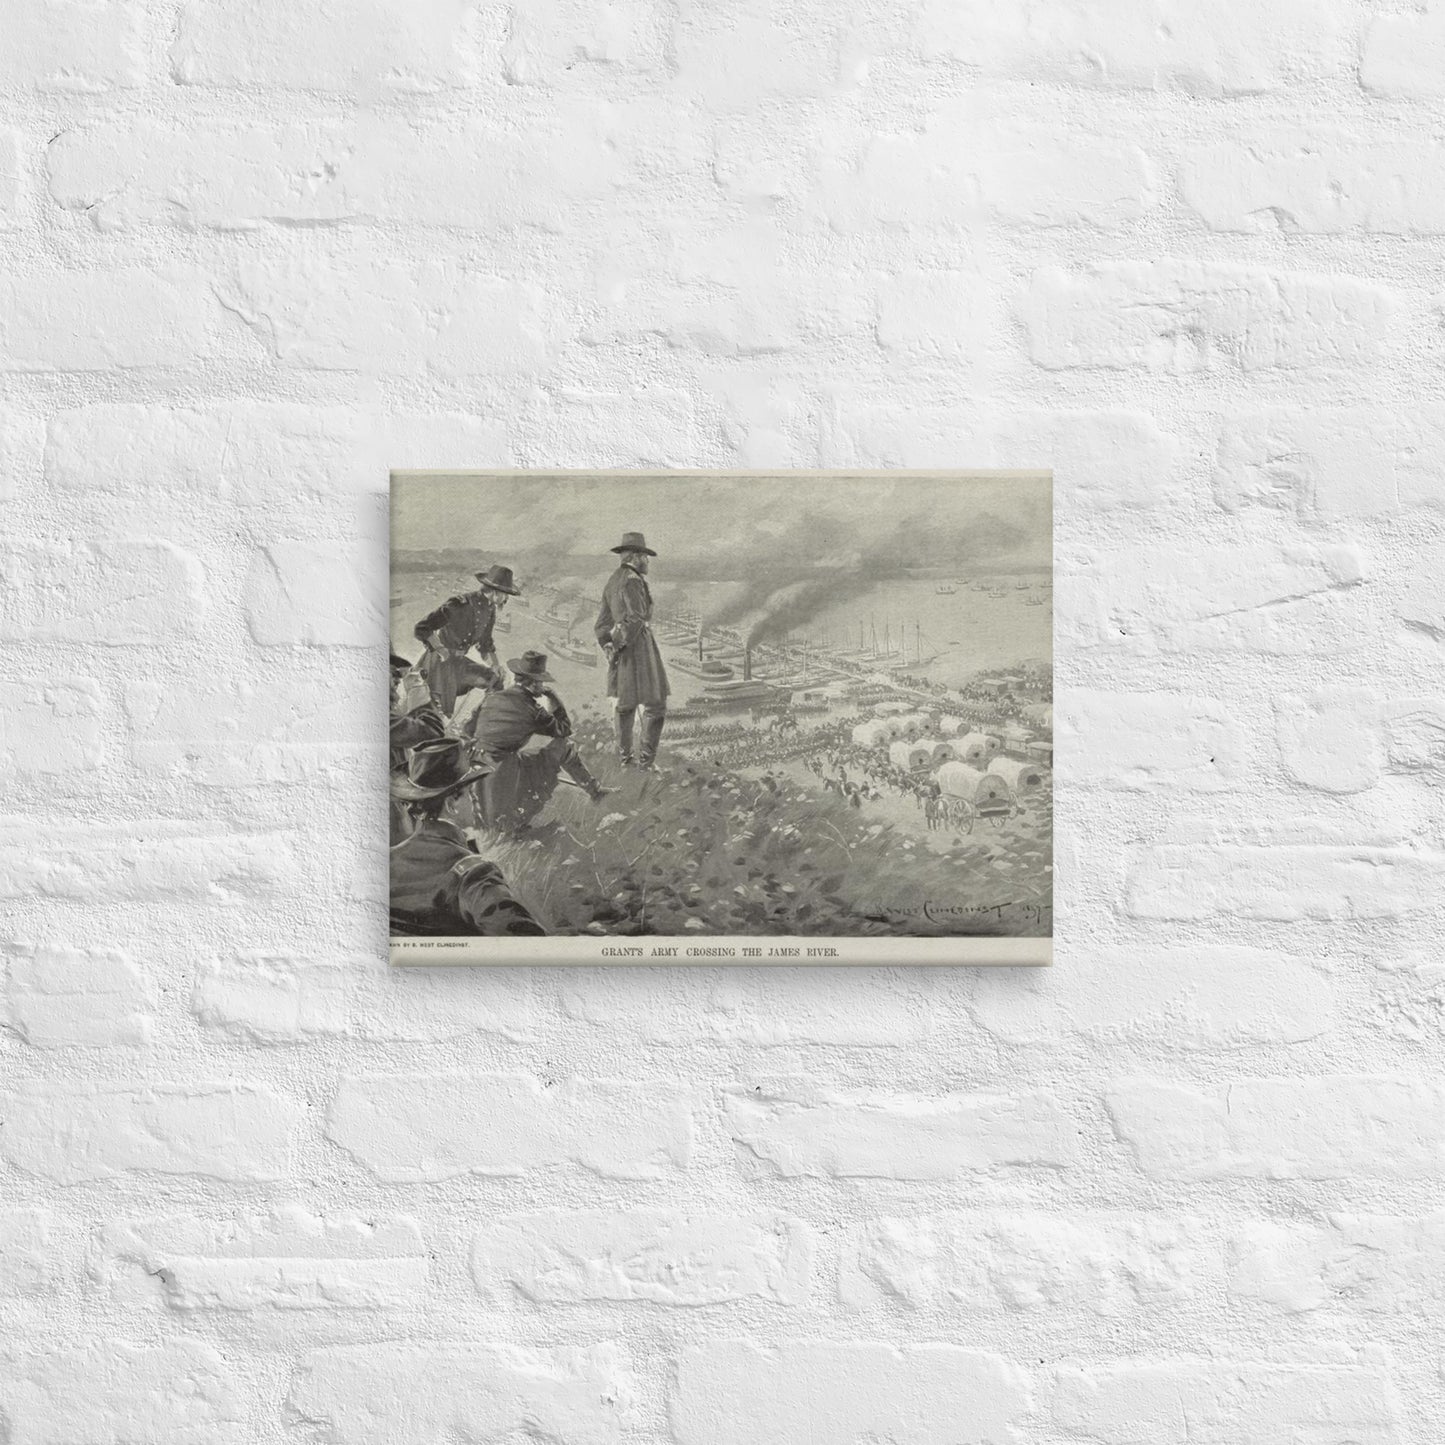 Ulysses S. Grant's Army Crossing the James River Canvas Print